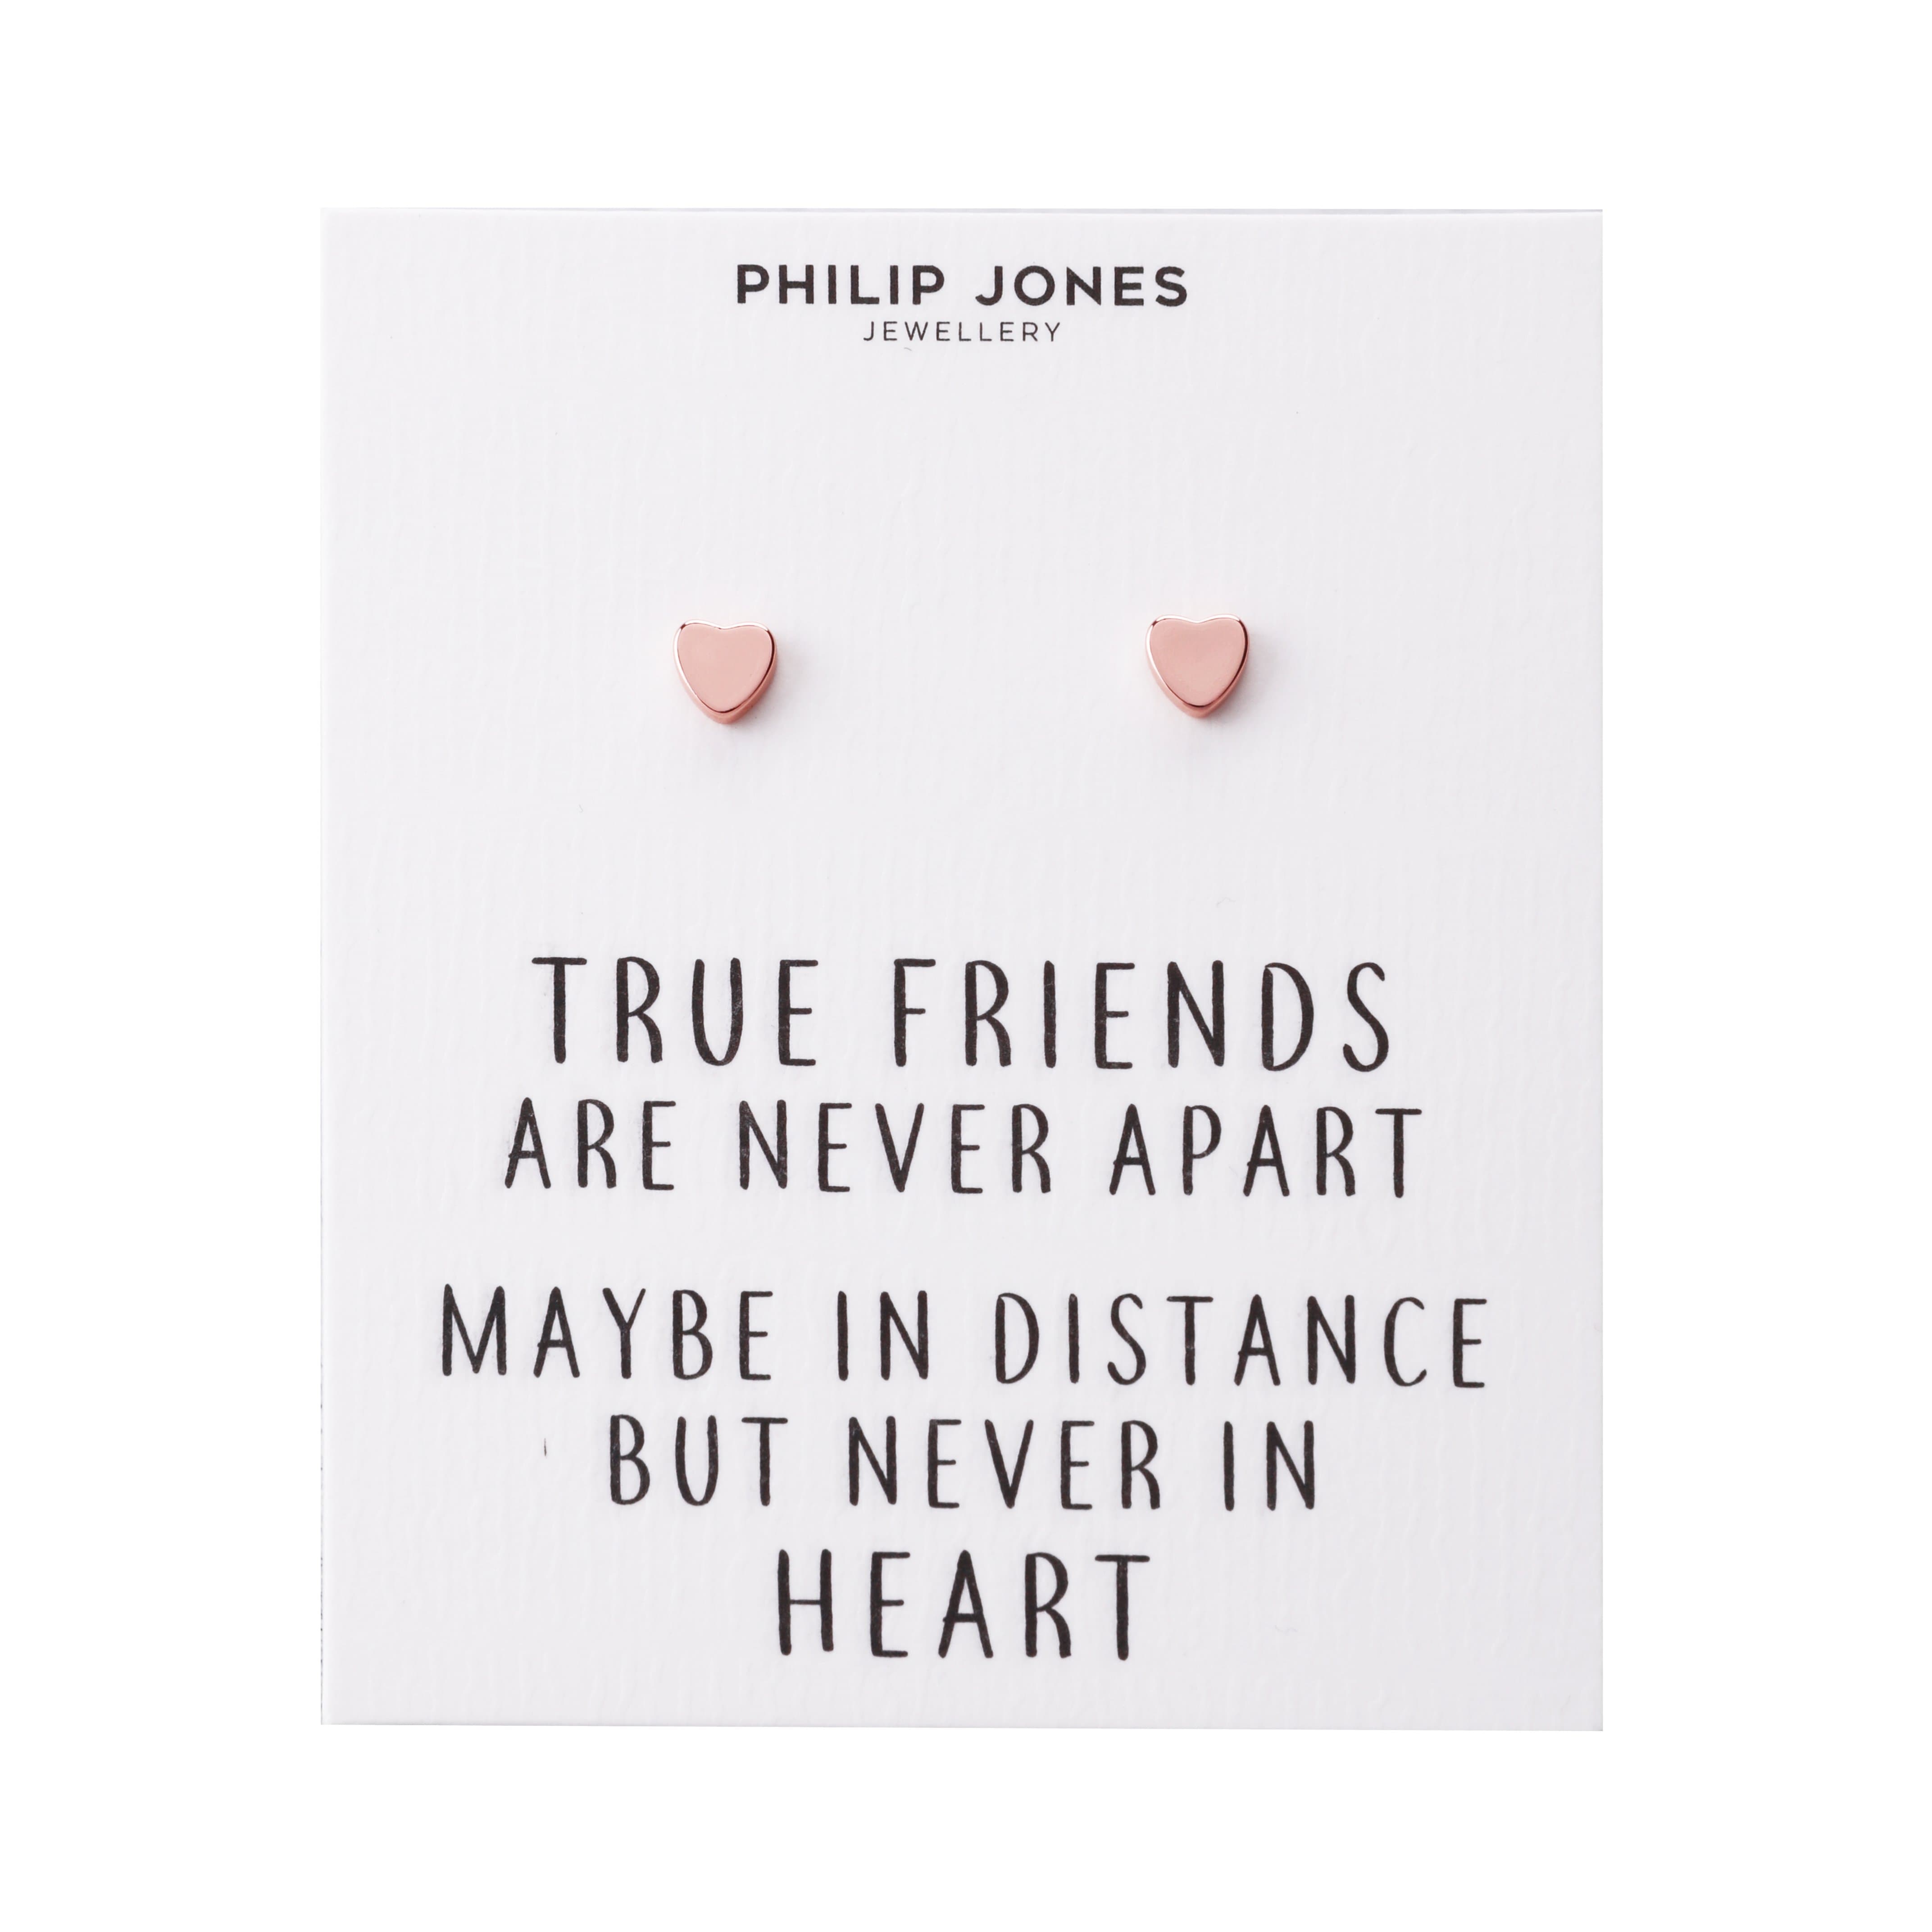 Rose Gold Plated Heart Stud Earrings with Quote Card by Philip Jones Jewellery